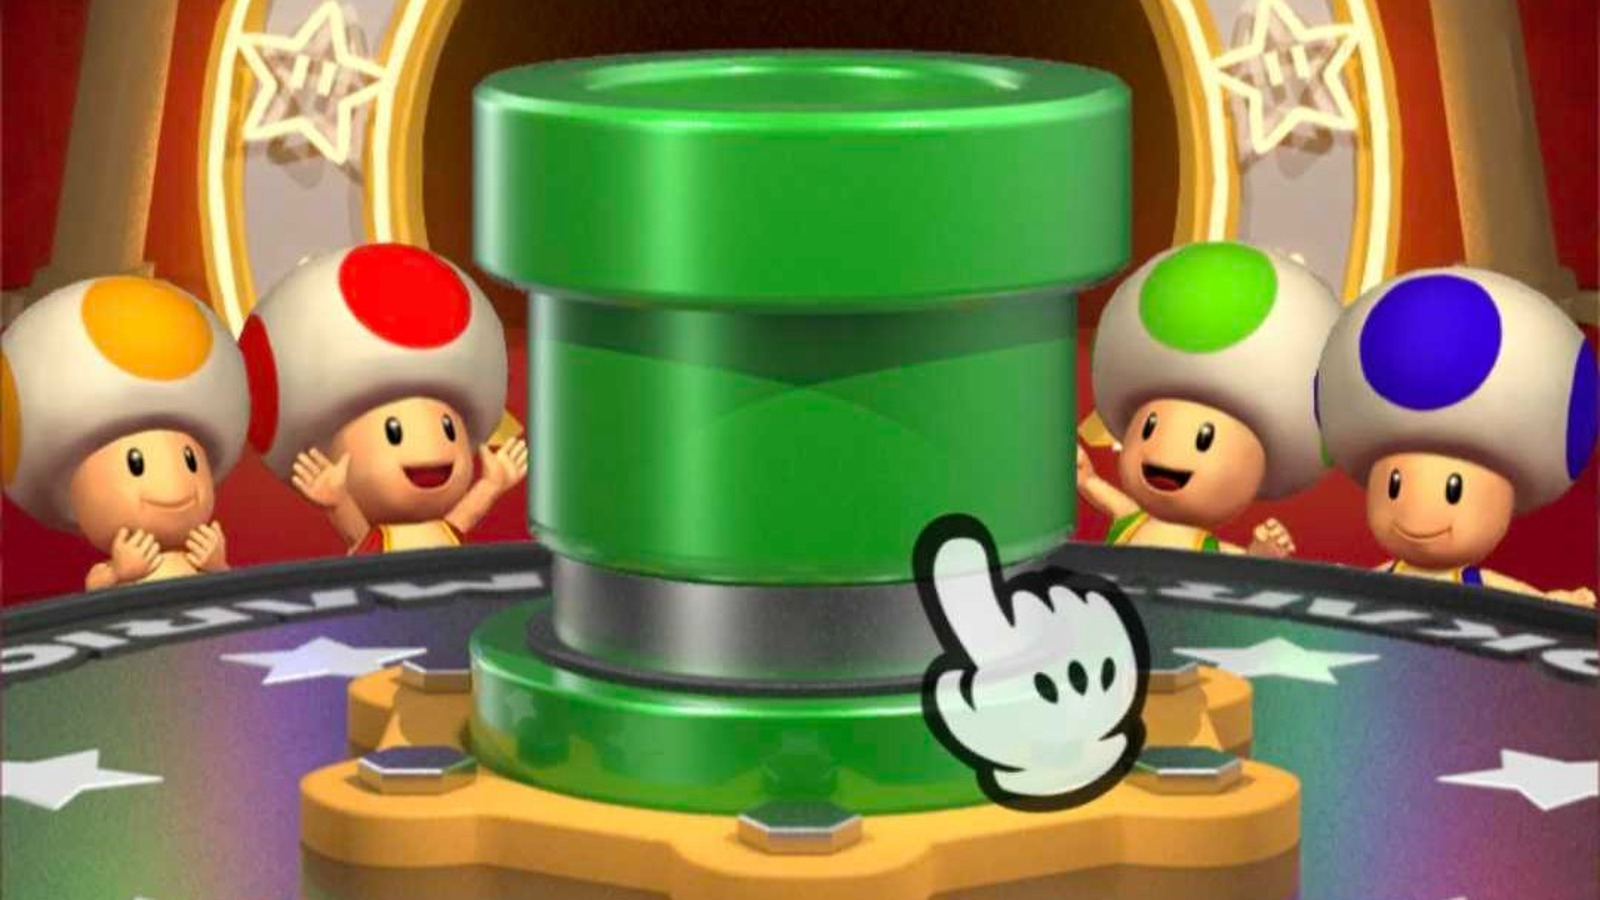 Mario Kart Tour's in-game gacha Pipe is being removed